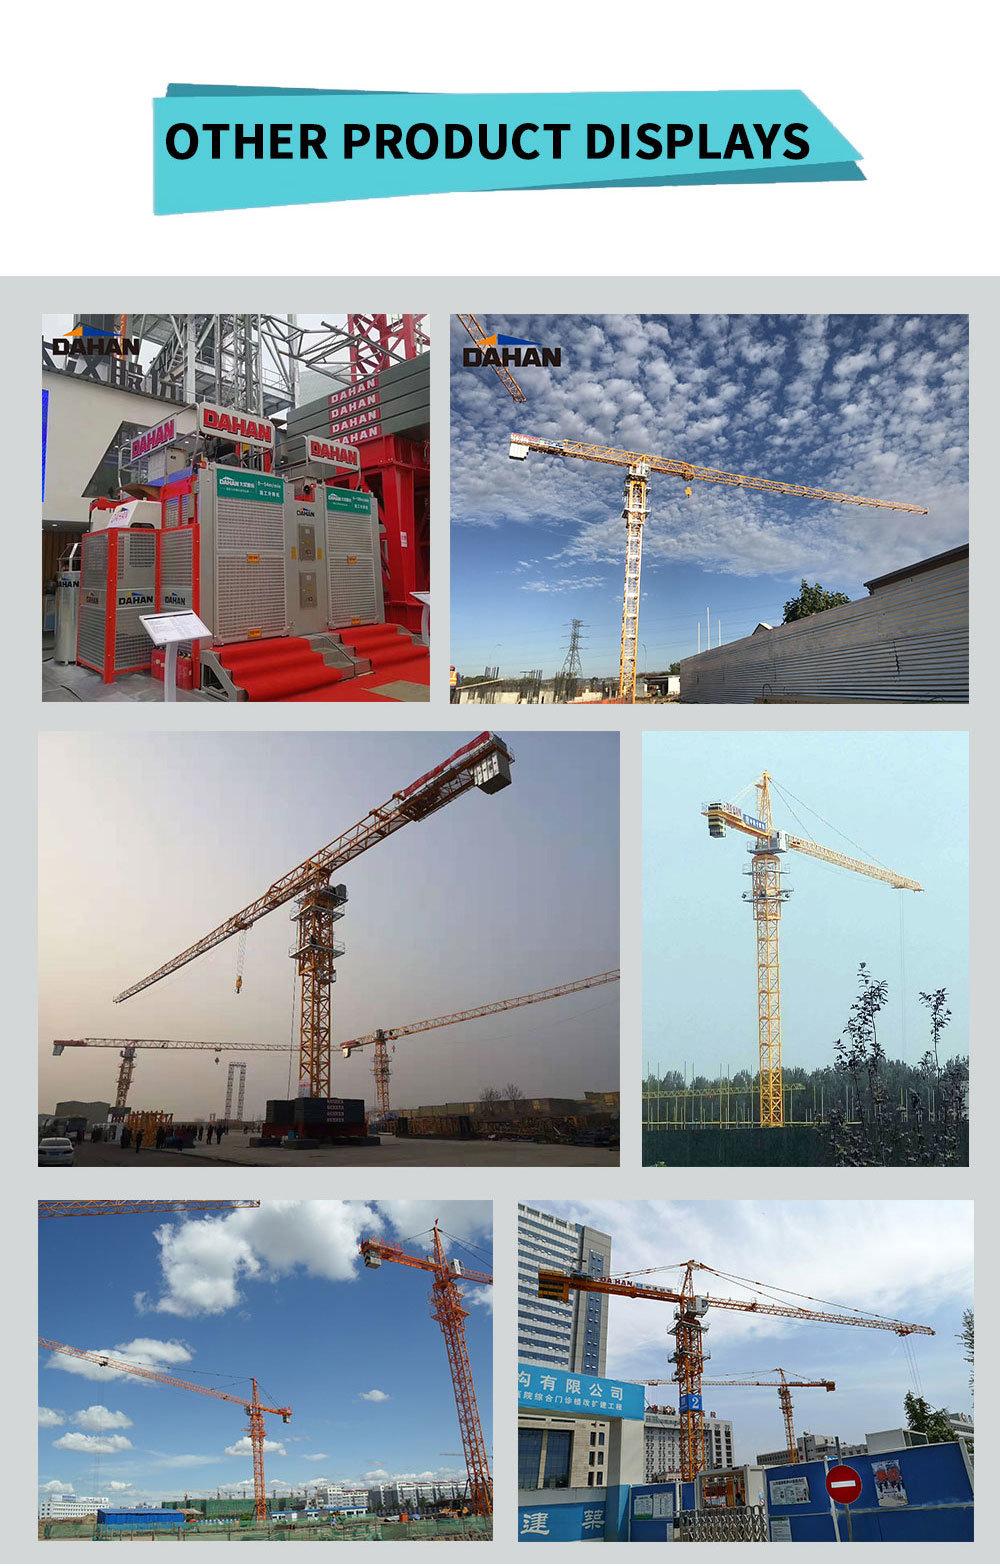 16 Ton Tower Cap Tower Crane Widely Used in Construction Sites